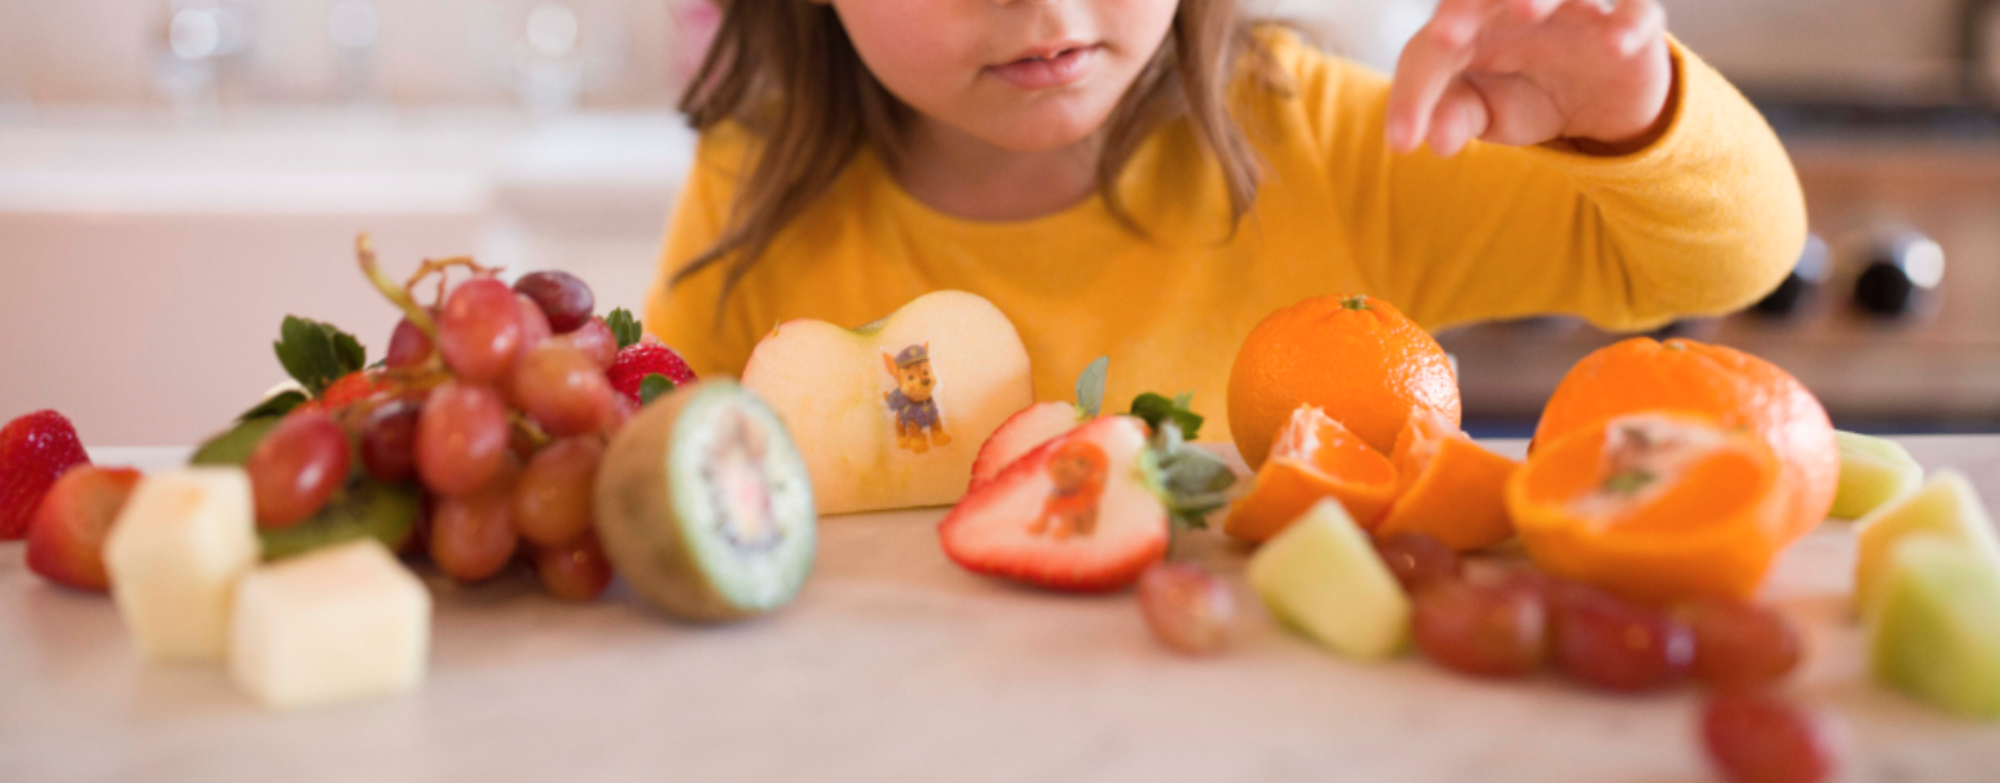 objectives of nutrition education